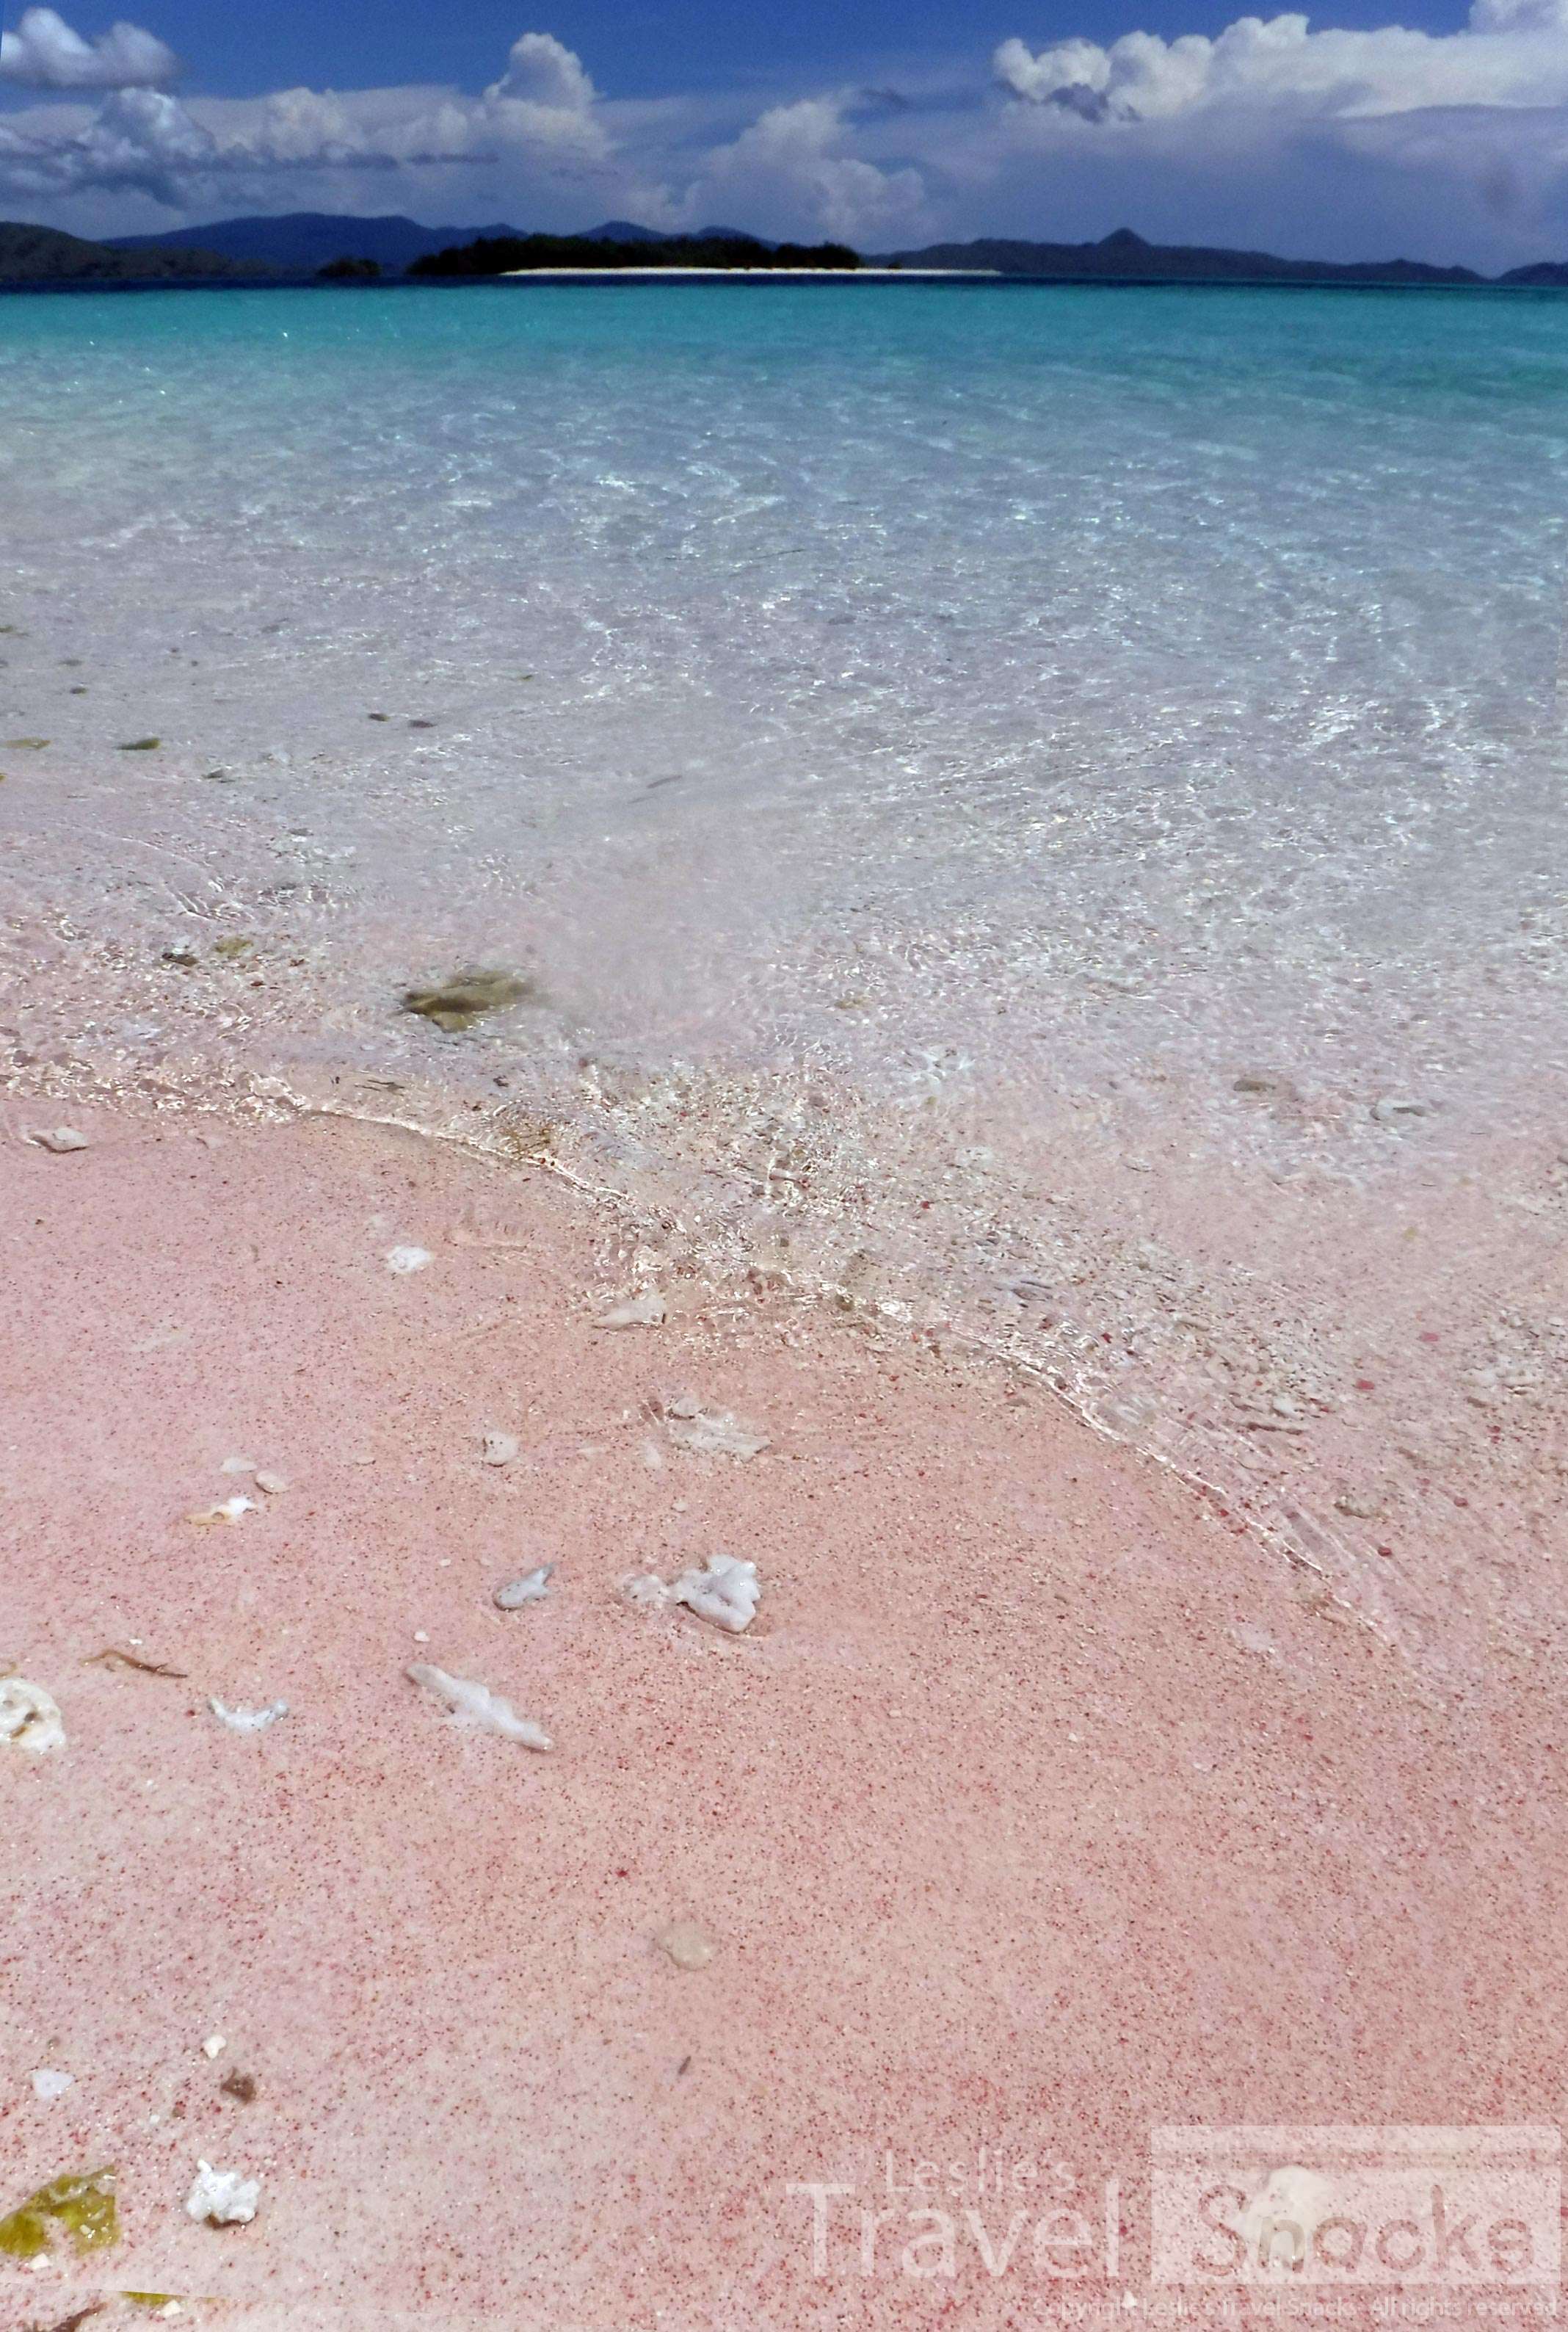 Pink sand, turquoise waters, blue sky. Happy.